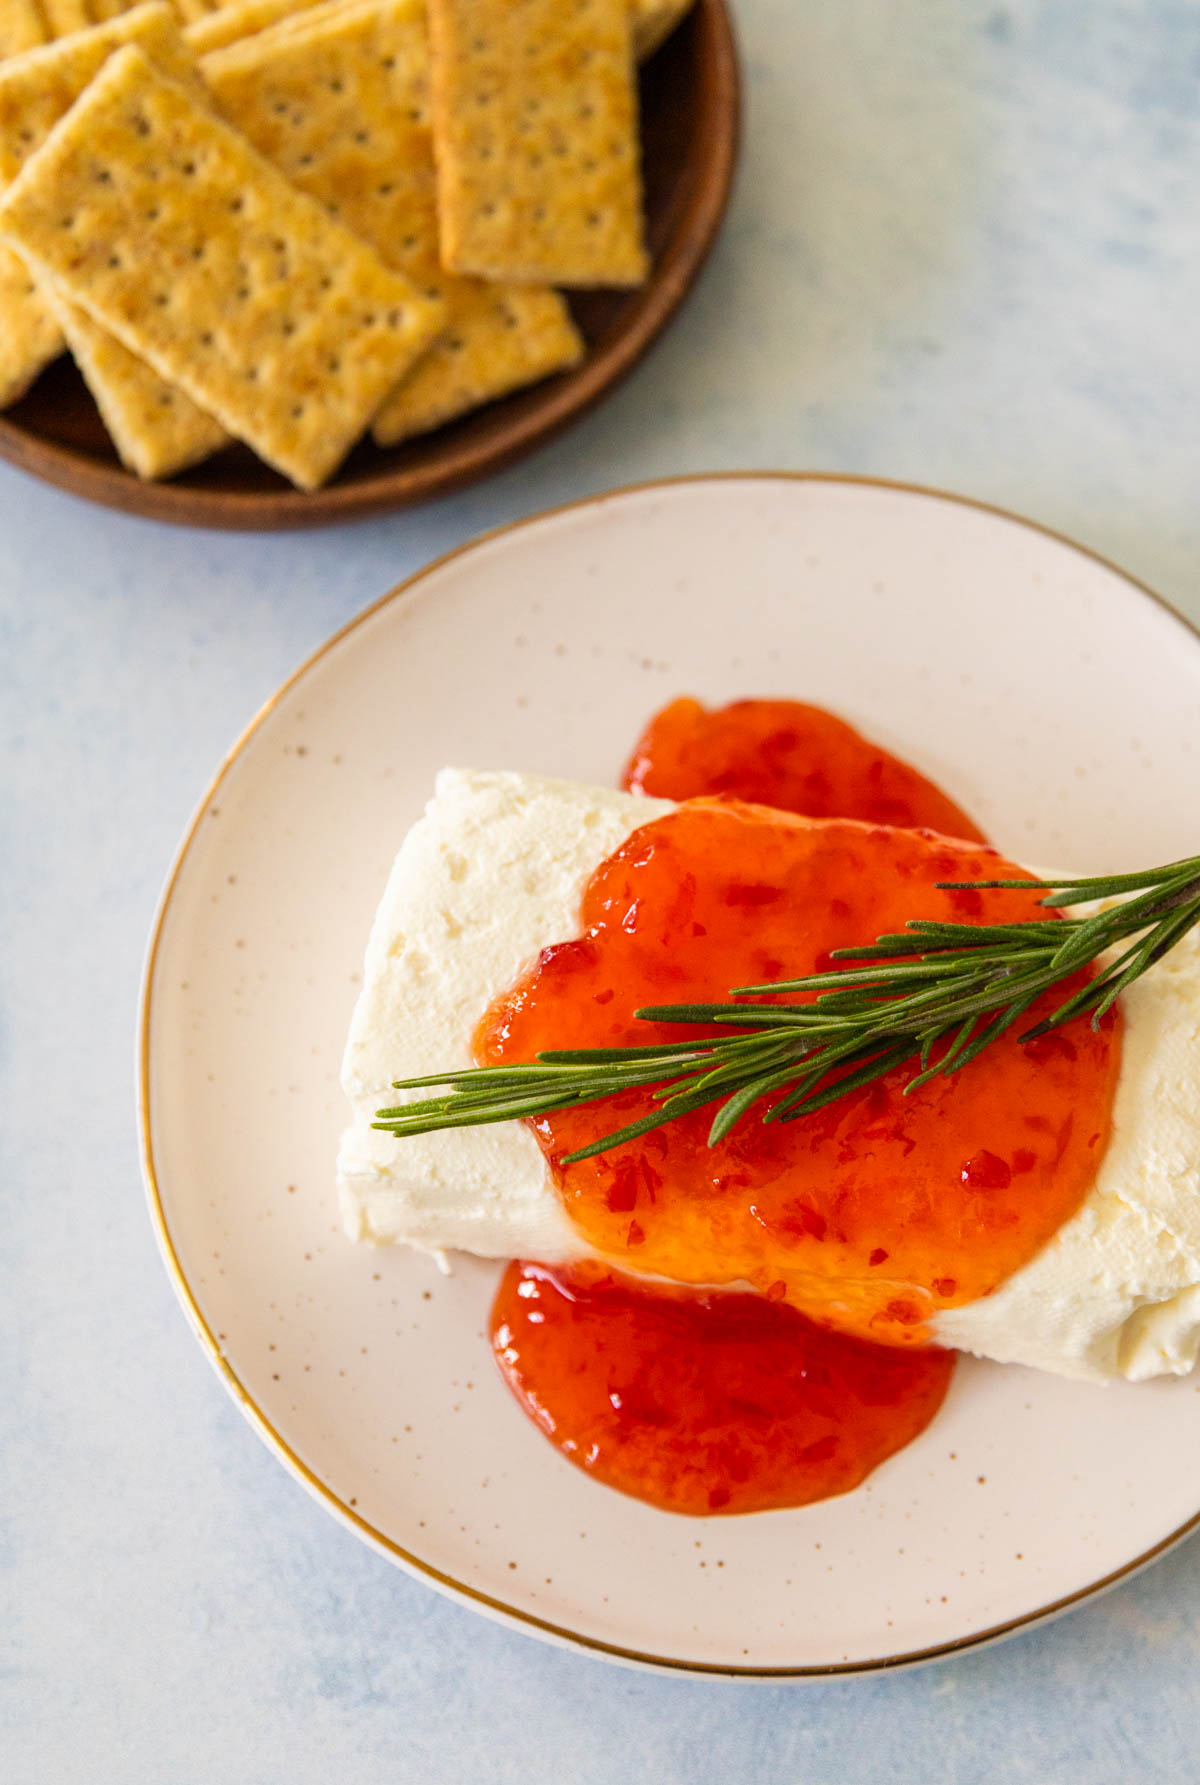 A block of cream cheese on a plate has pepper jelly spooned over the top with a sprig of fresh rosemary. A plate of crackers is in the background.